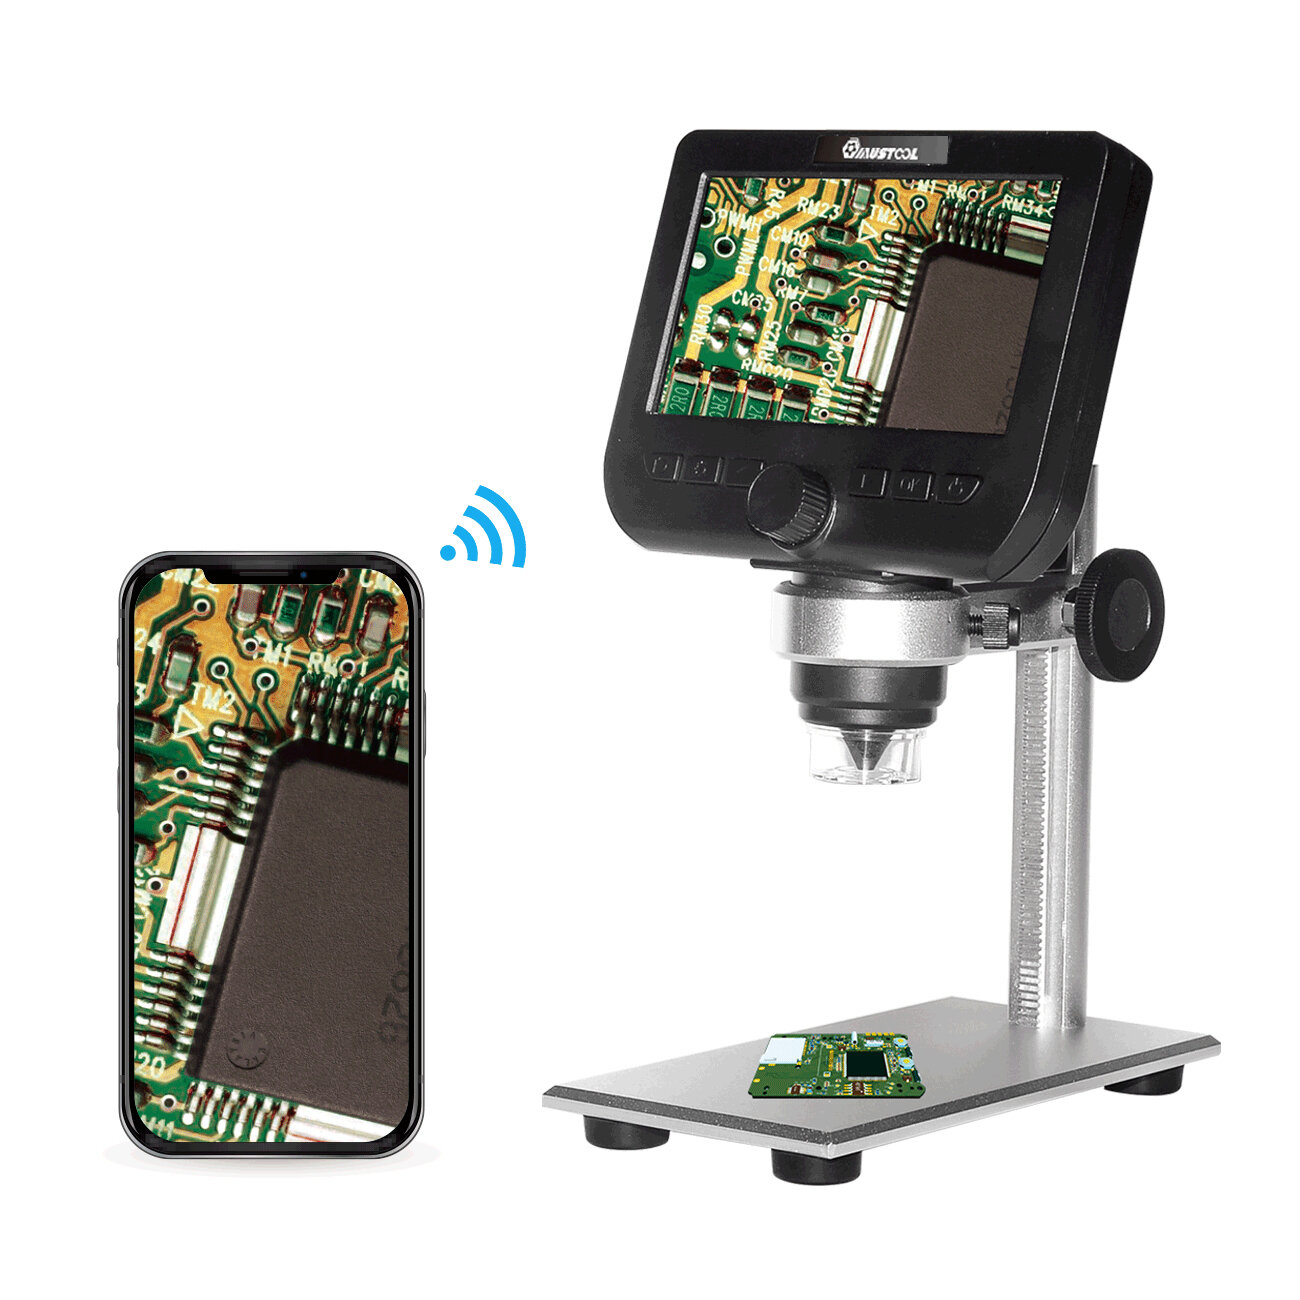 MUSTOOL G610 WIFI 2MP 4.3inch LCD Microscope Support IOS Android System Built－in Rechargeable Battery ＆ 8 Adjustable Leds with Metal Stand